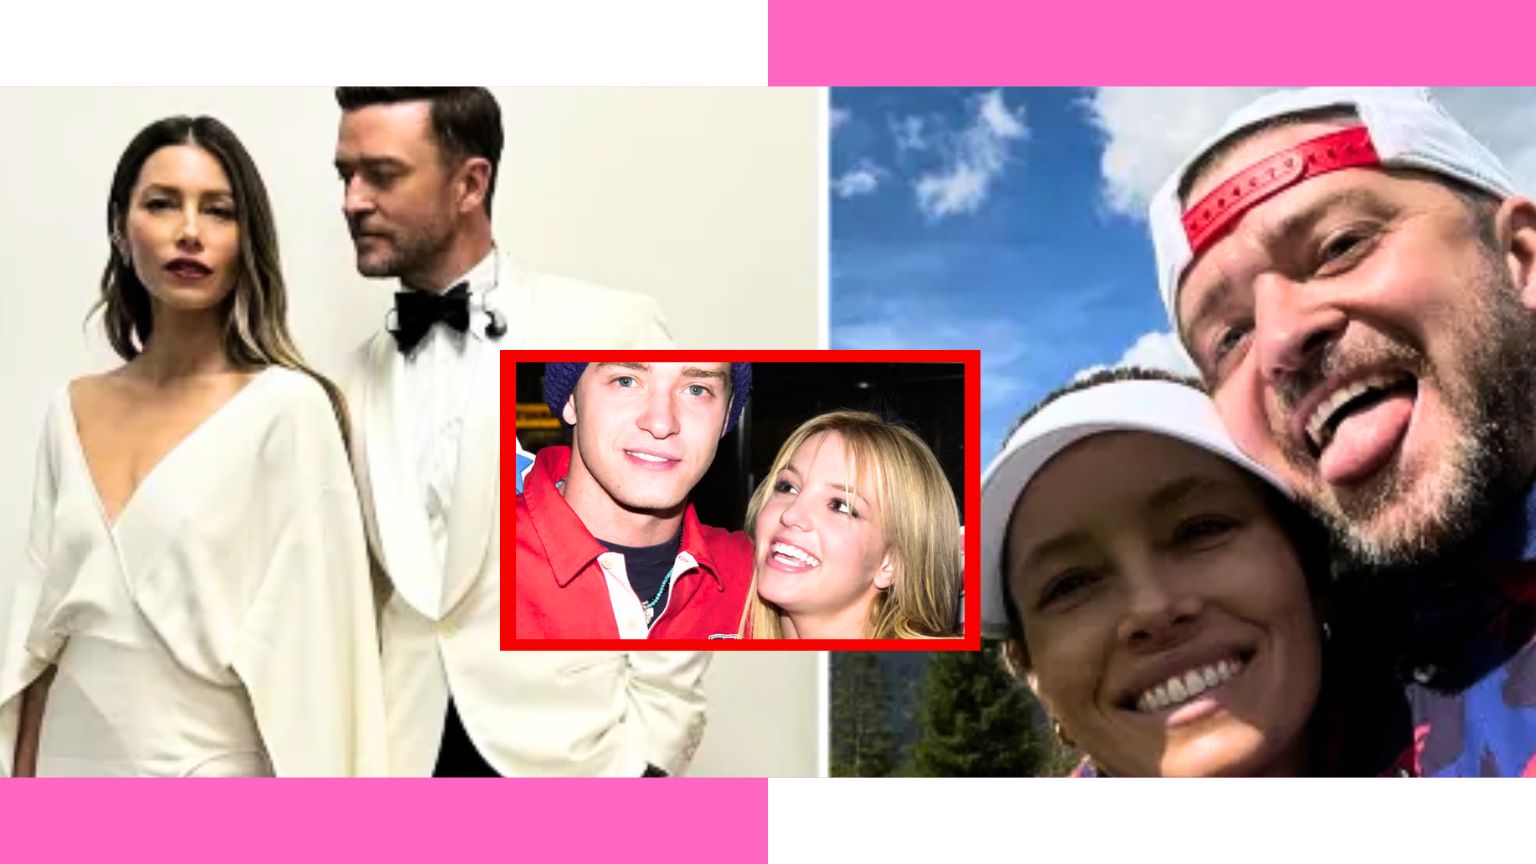 Justin Timberlake and Jessica Biel's Private Affair Unfolds After Britney Spears' Tell-All Book Release